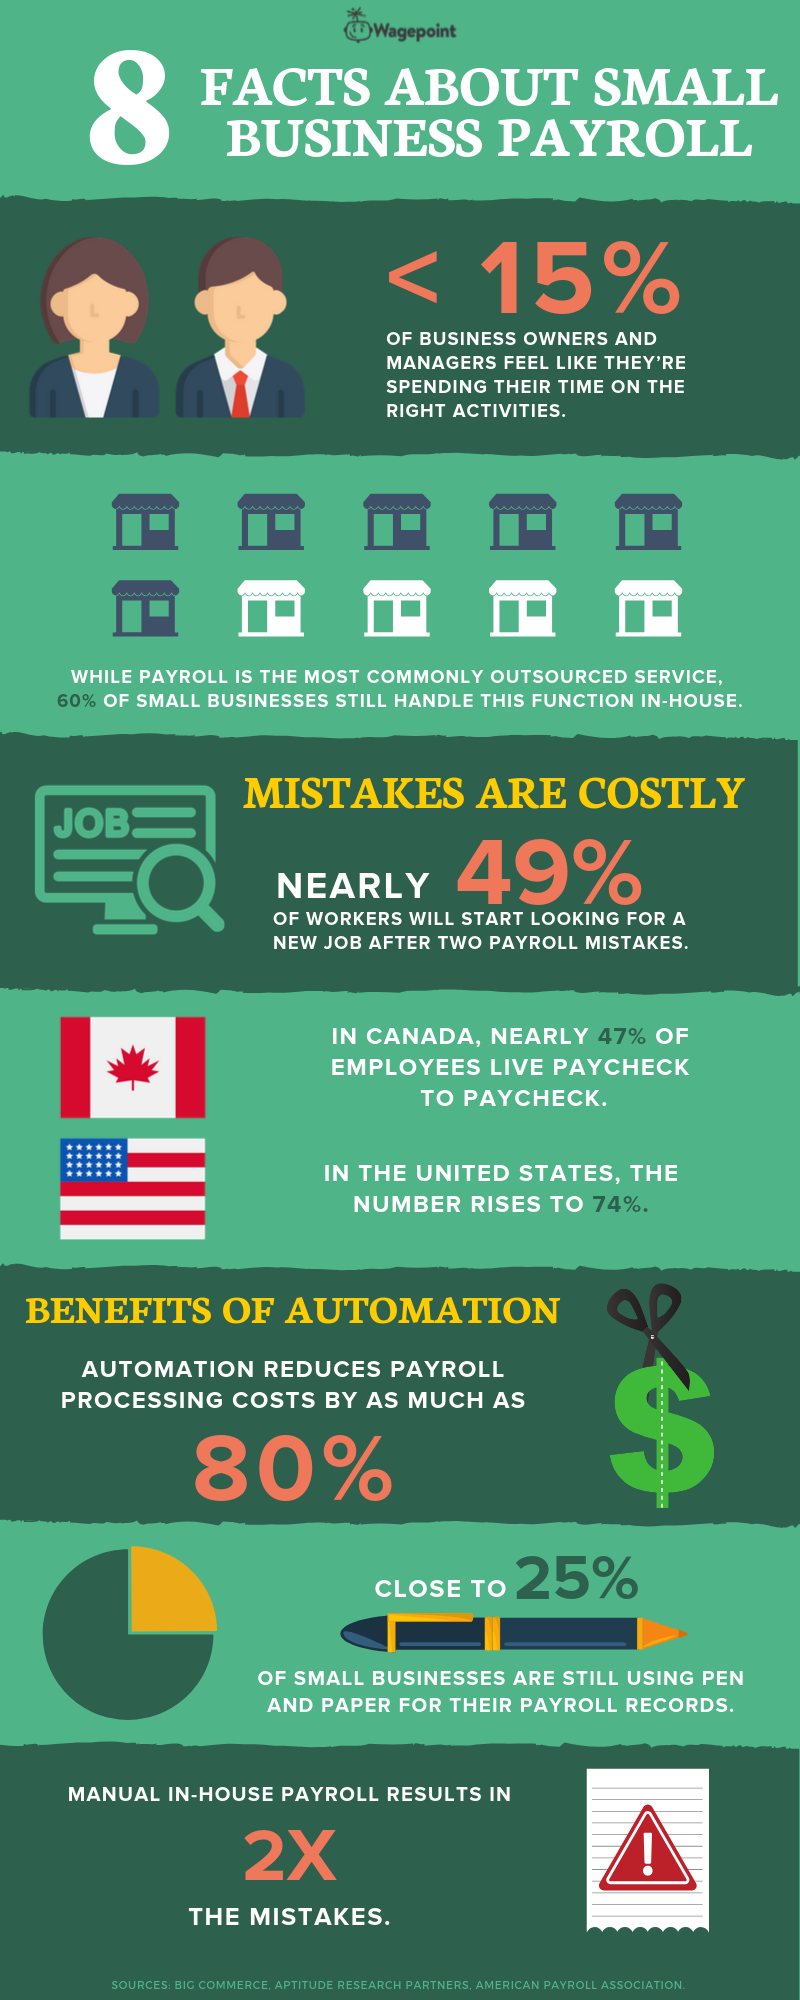 Wagepoint Small Business Payroll Facts About Small Business Payroll Infographic